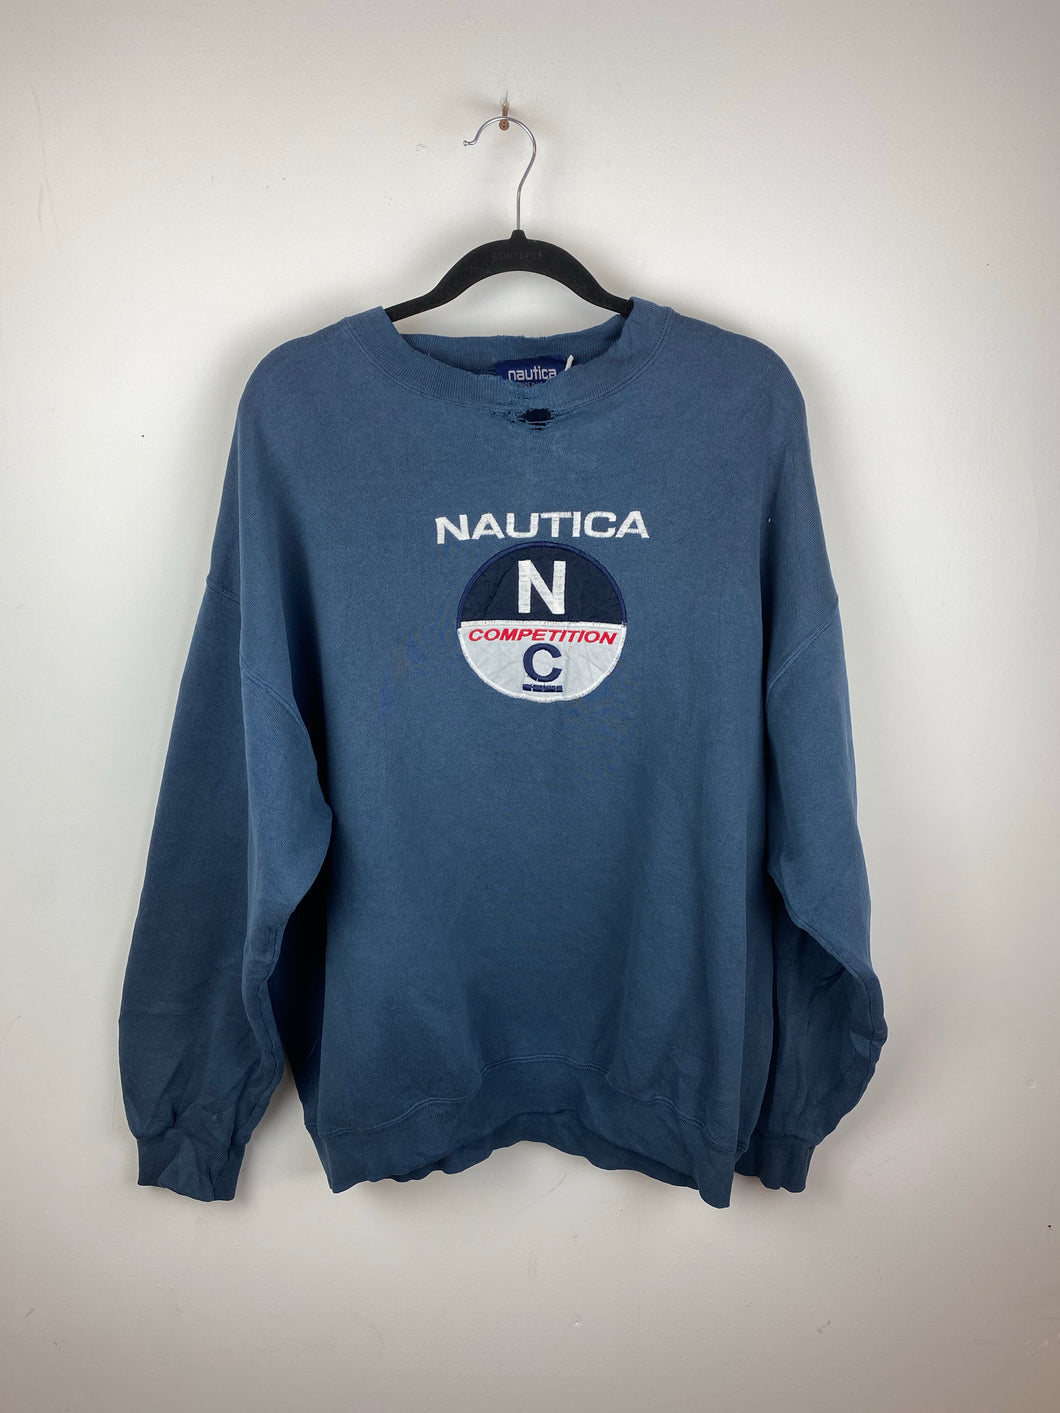 Vintage Nautica Competition embroidered crewneck